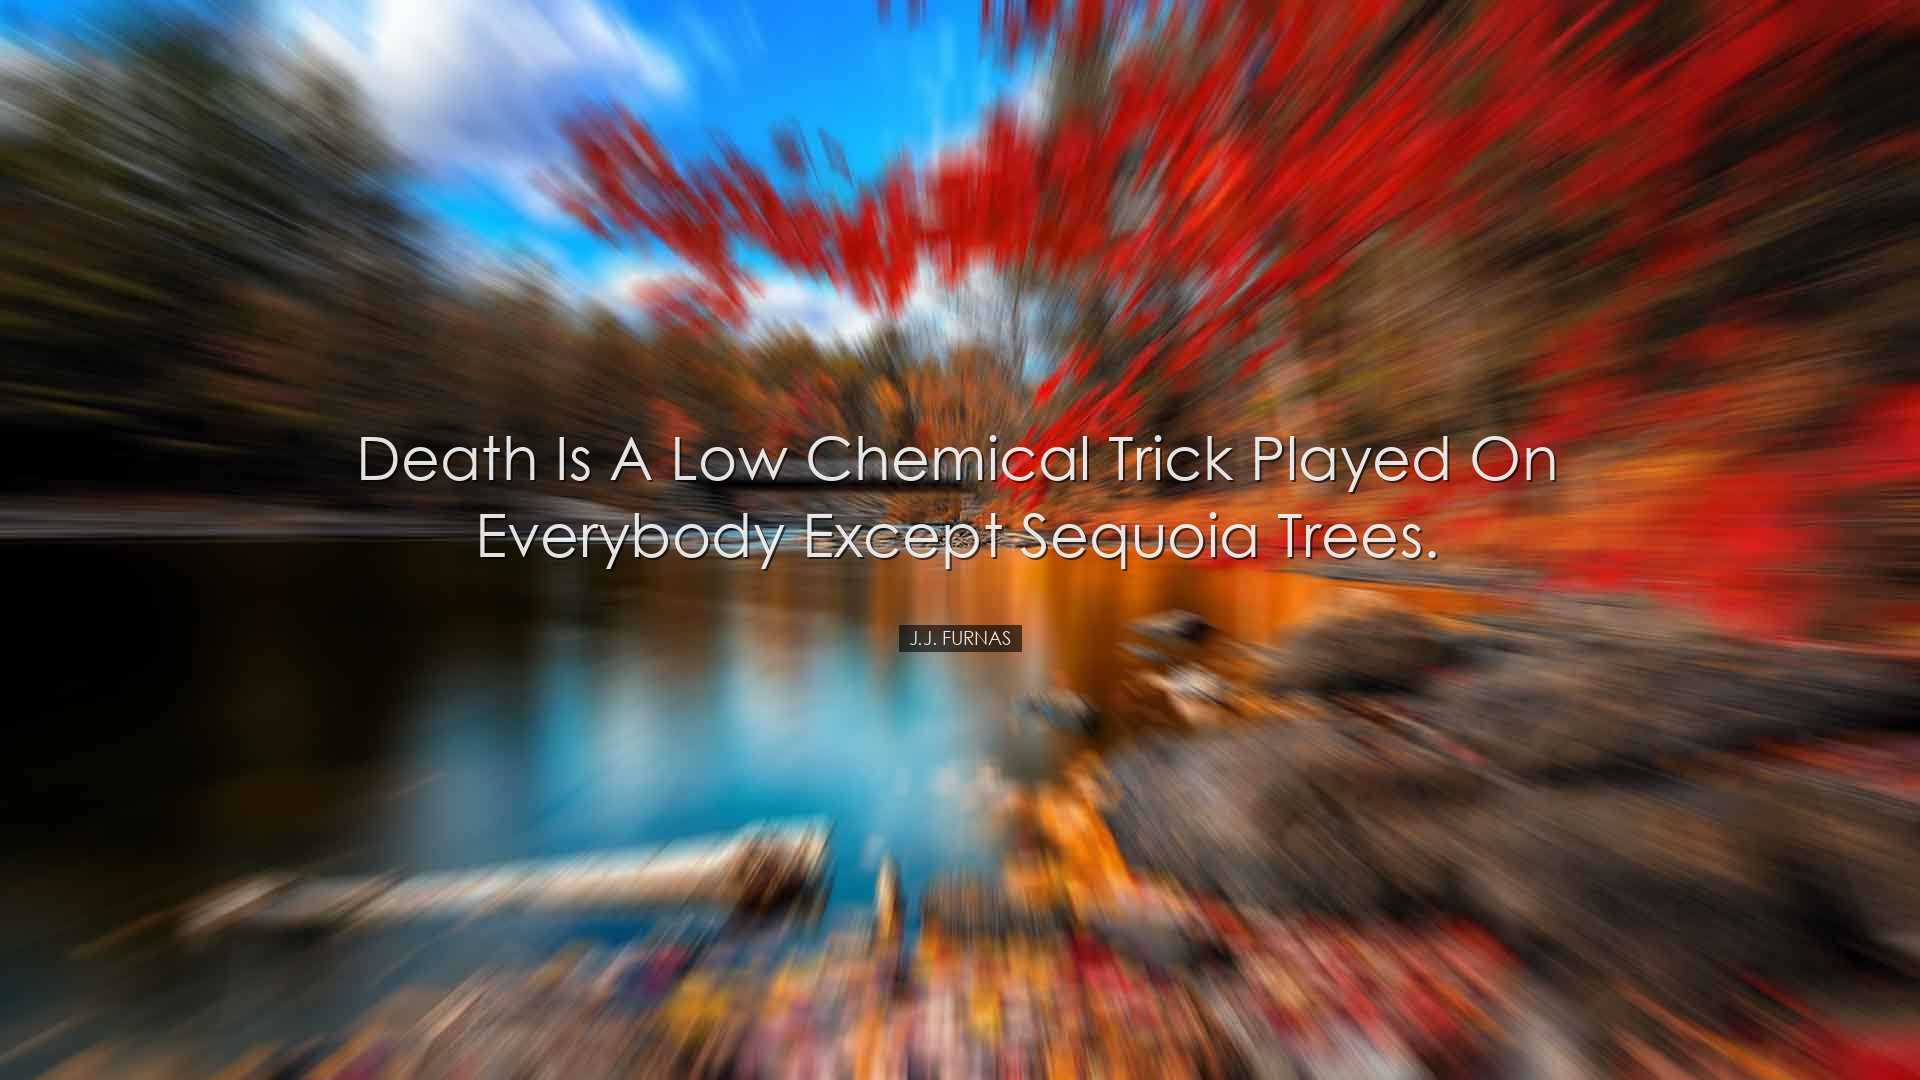 Death is a low chemical trick played on everybody except sequoia t